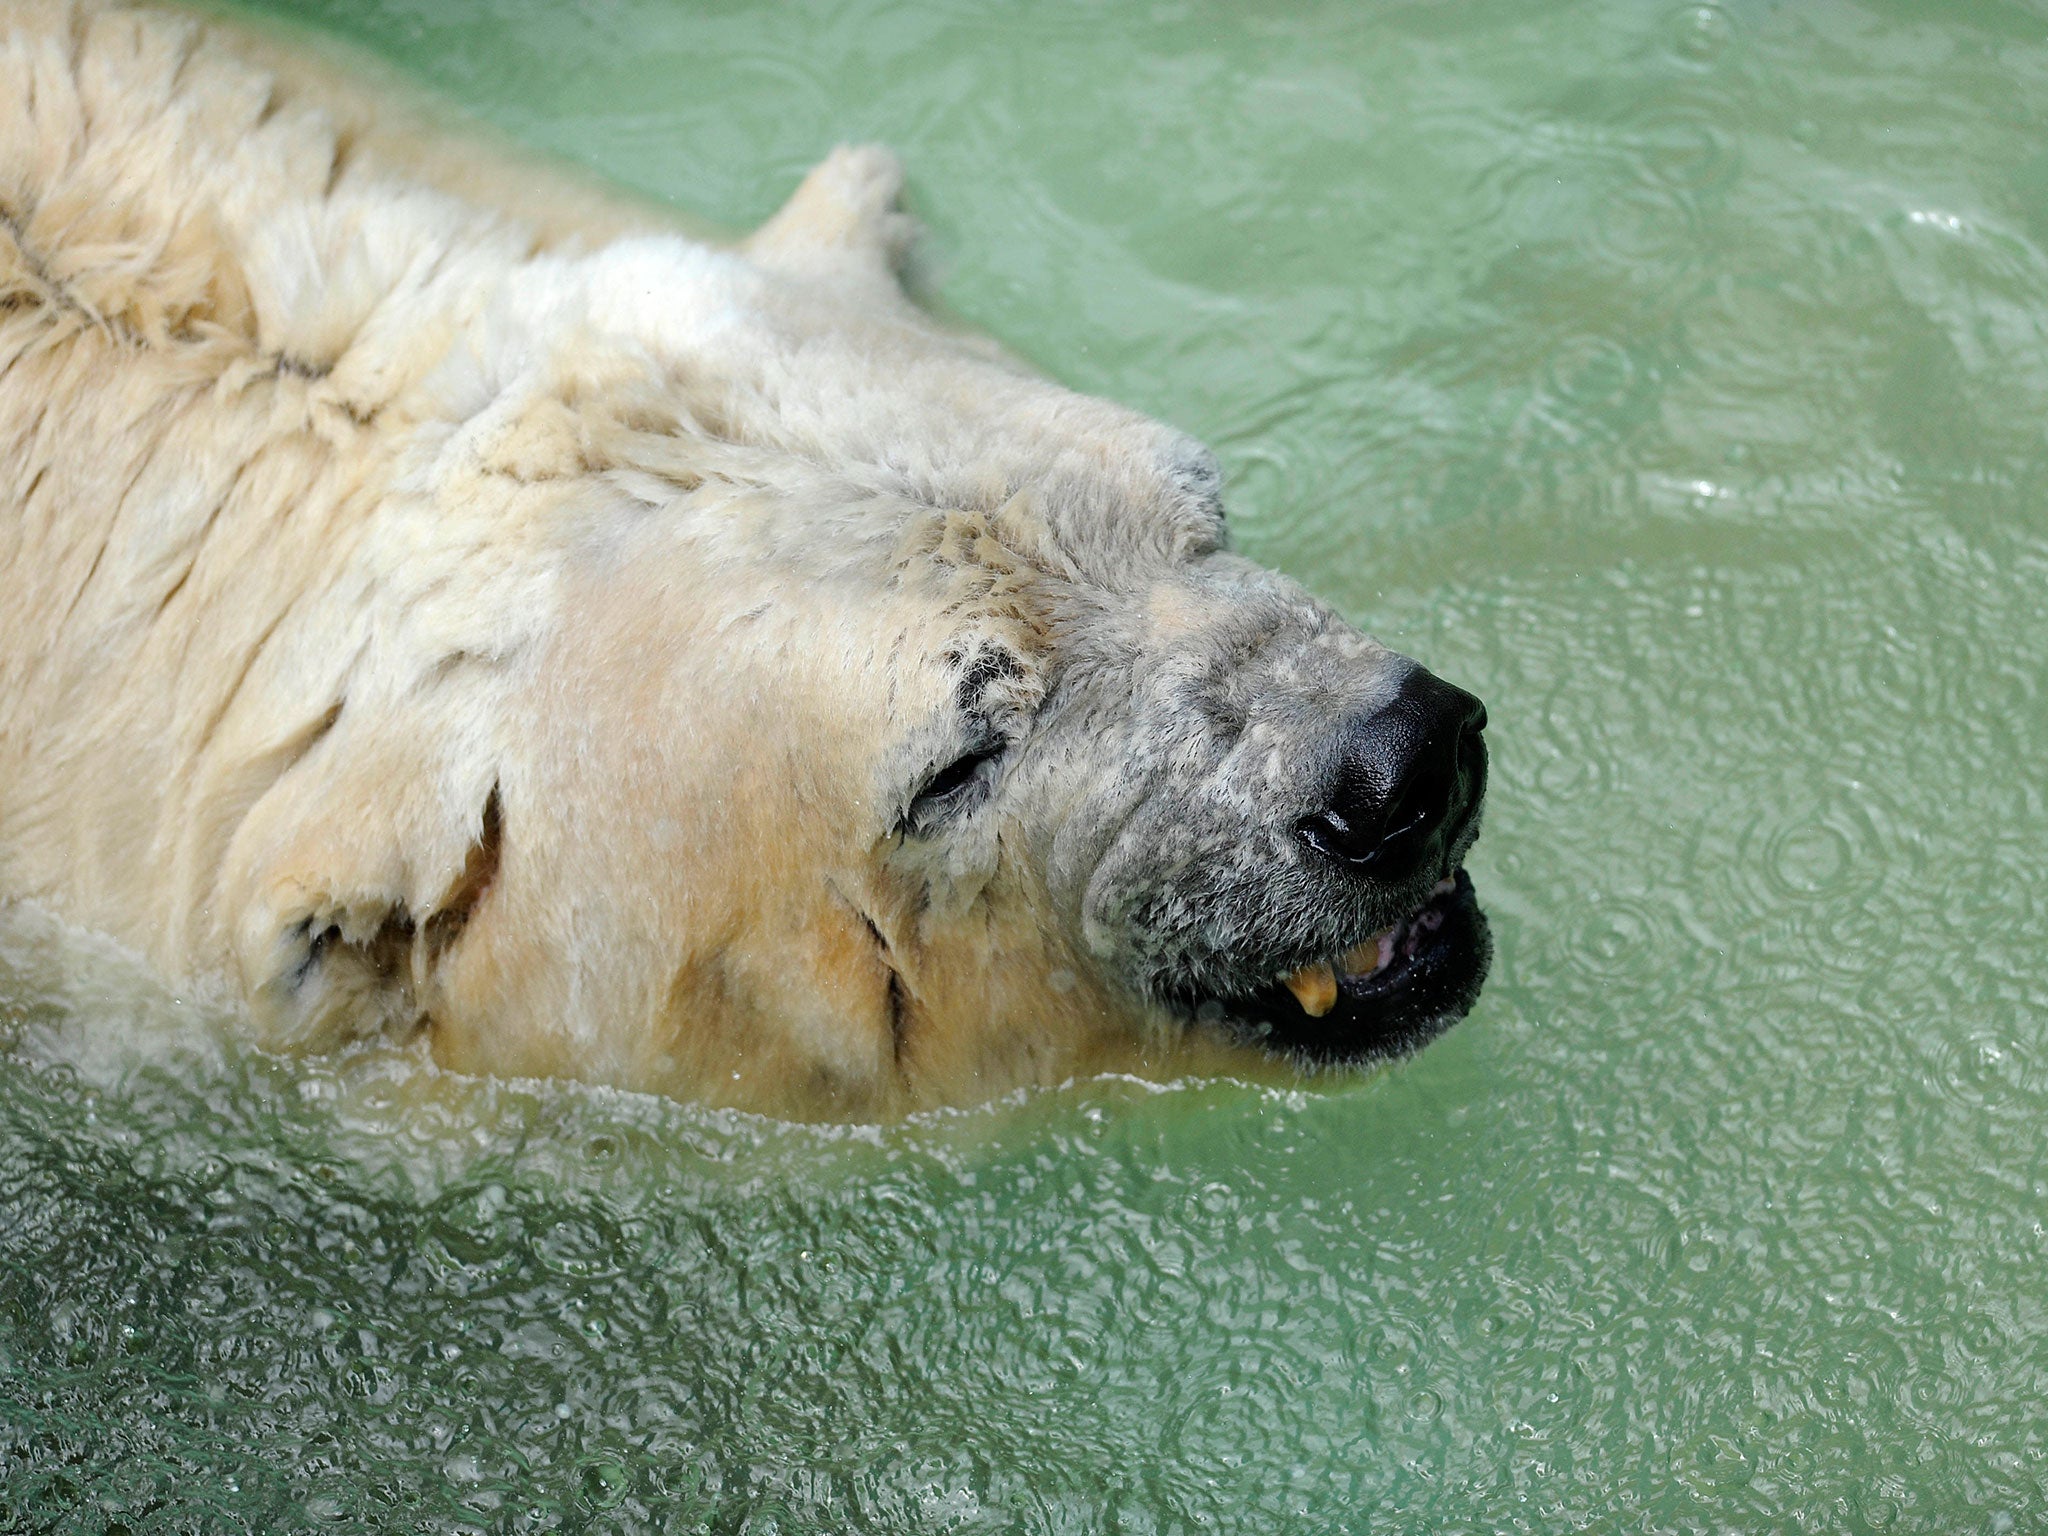 Arturo, the only polar bear in Argentina, living in captivity at a zoo in Mendoza, 1050 km west of Buenos Aires, is pictured at his enclosure on February 5, 2014. Specialists and activists are lobbying to transfer old Arturo to a zoo in Canada to spare hi